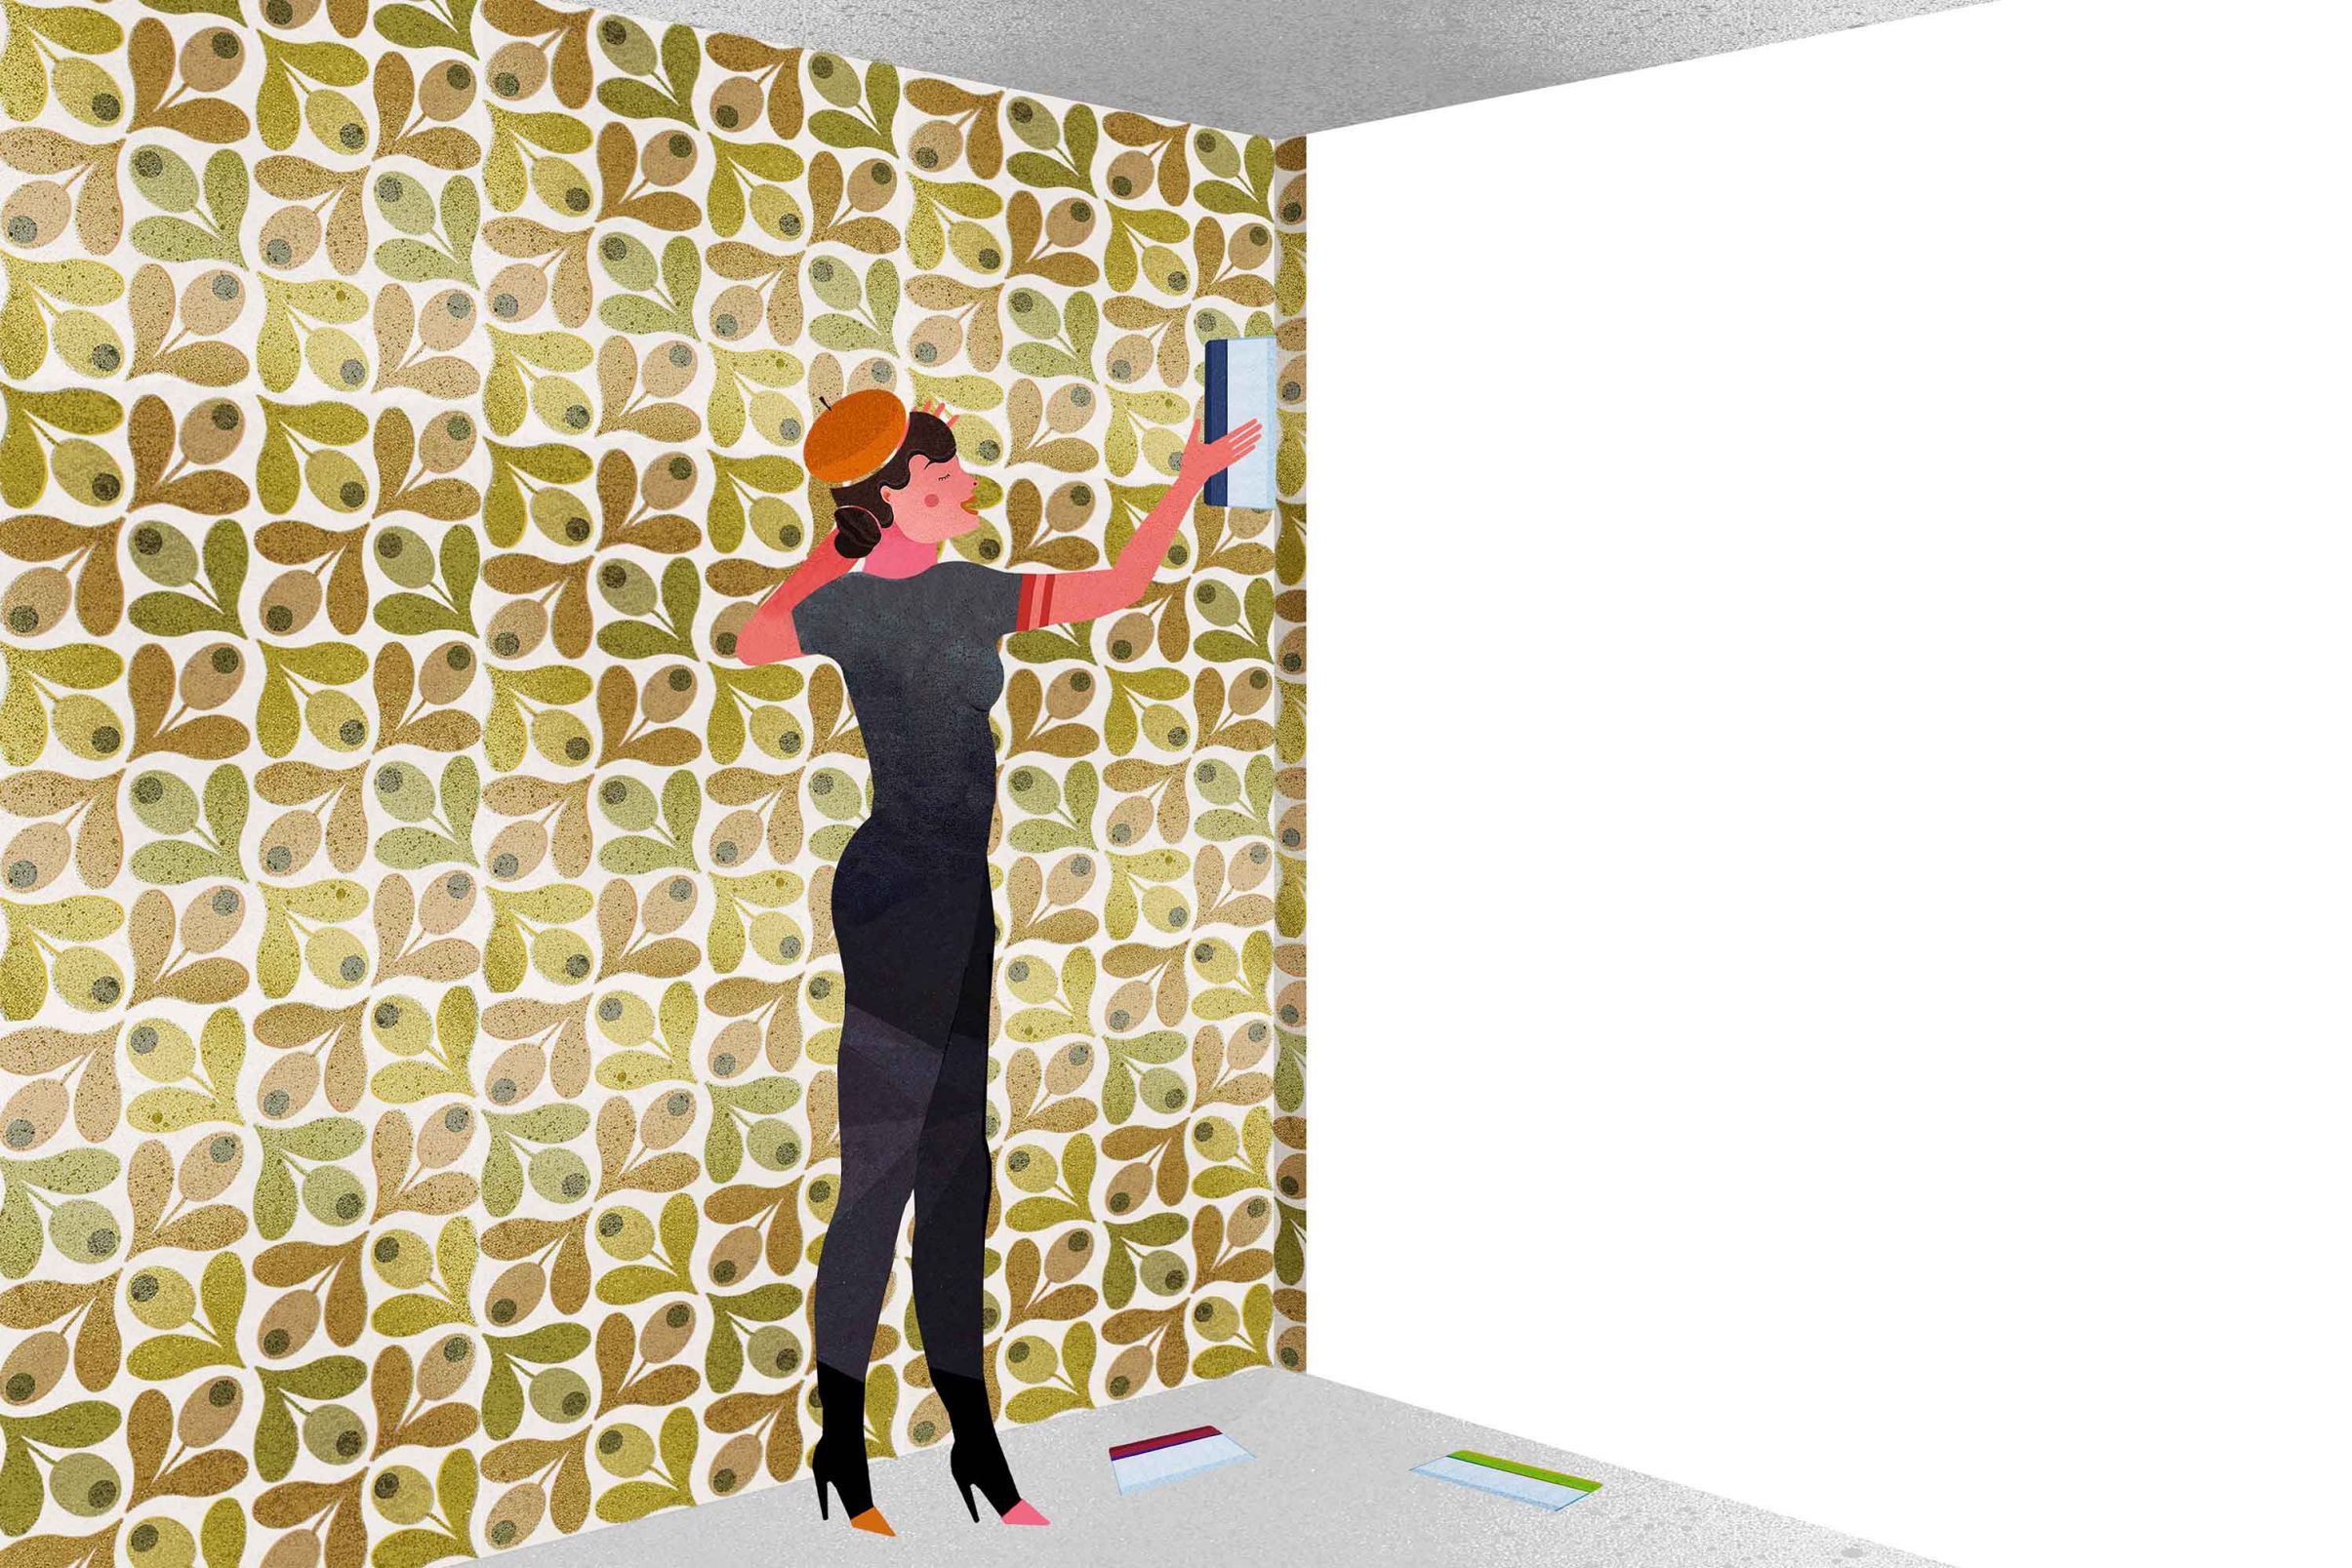 How to wallpaper in corners, Wallpapering Instructions